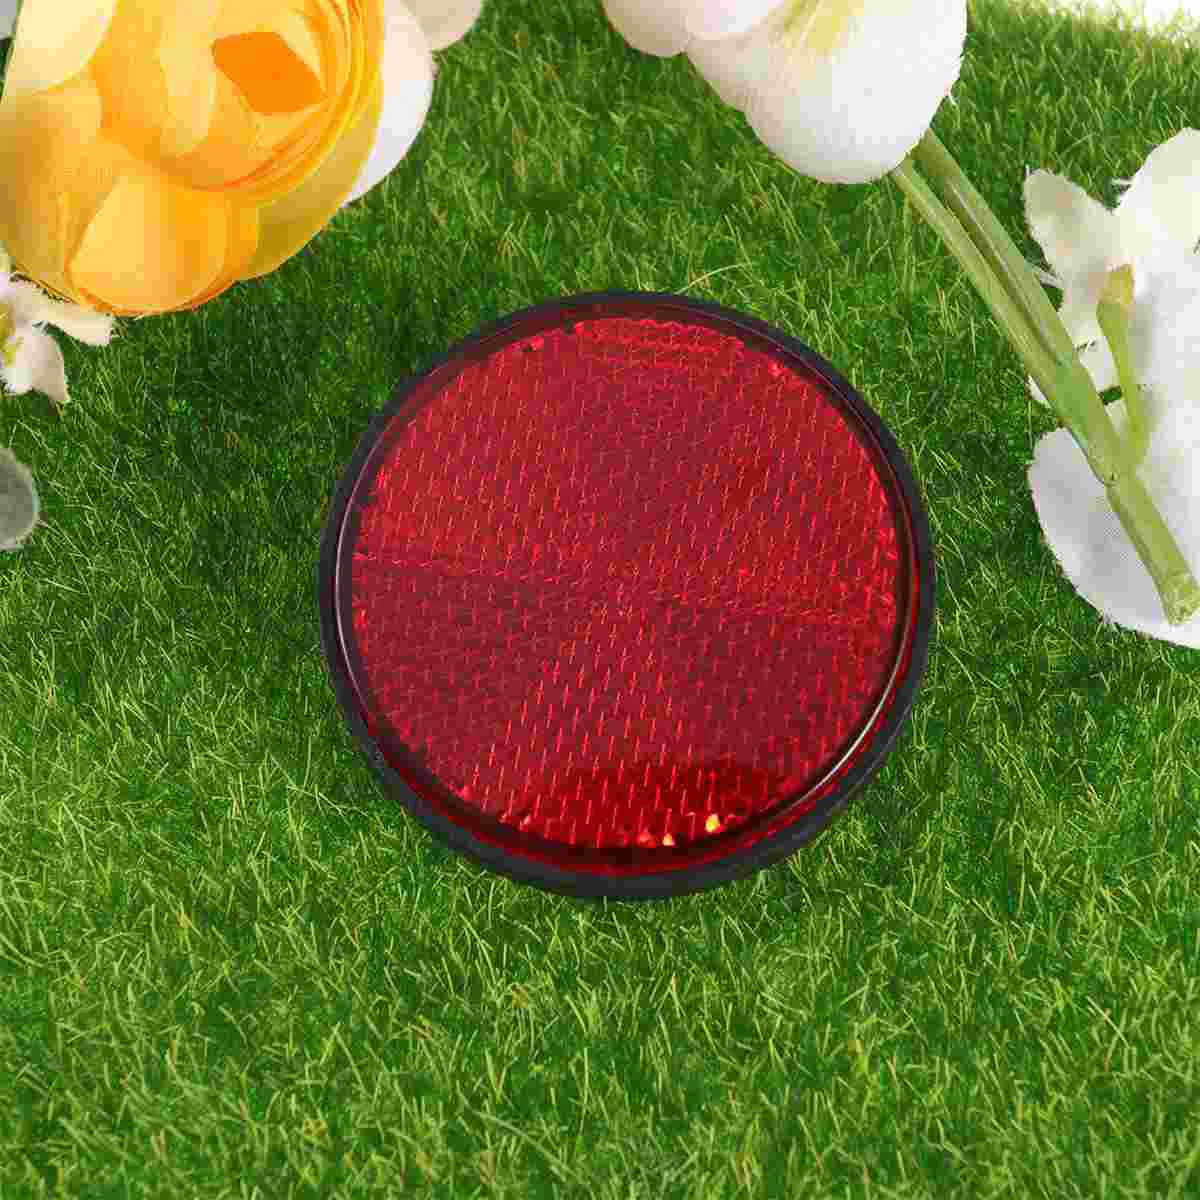 

2 Pcs Plastic Round Reflective Warning Reflector Fits for Car Motorcycle Motor Bikes Bicycles ATV Dirt Bike (Red)